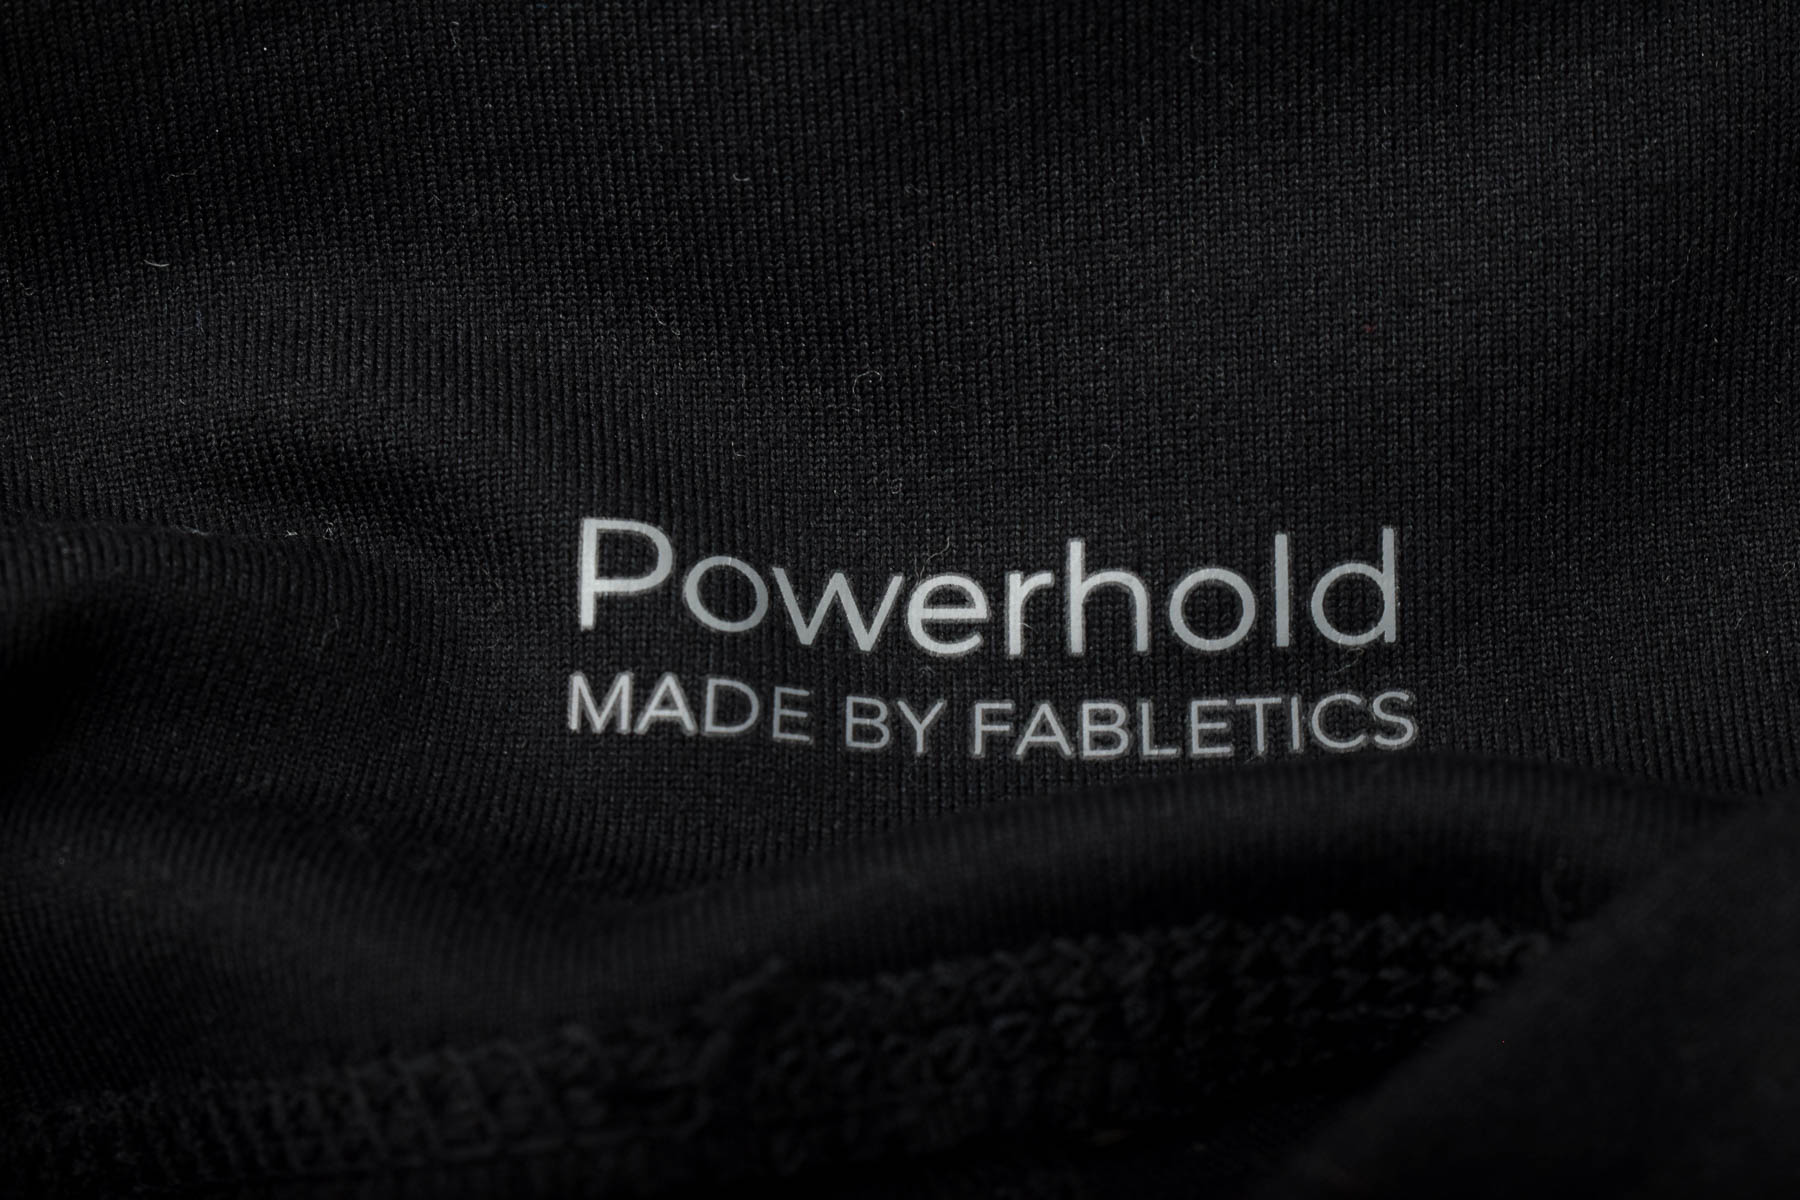 Leggings - PowerHold made by FABLETICS - 2